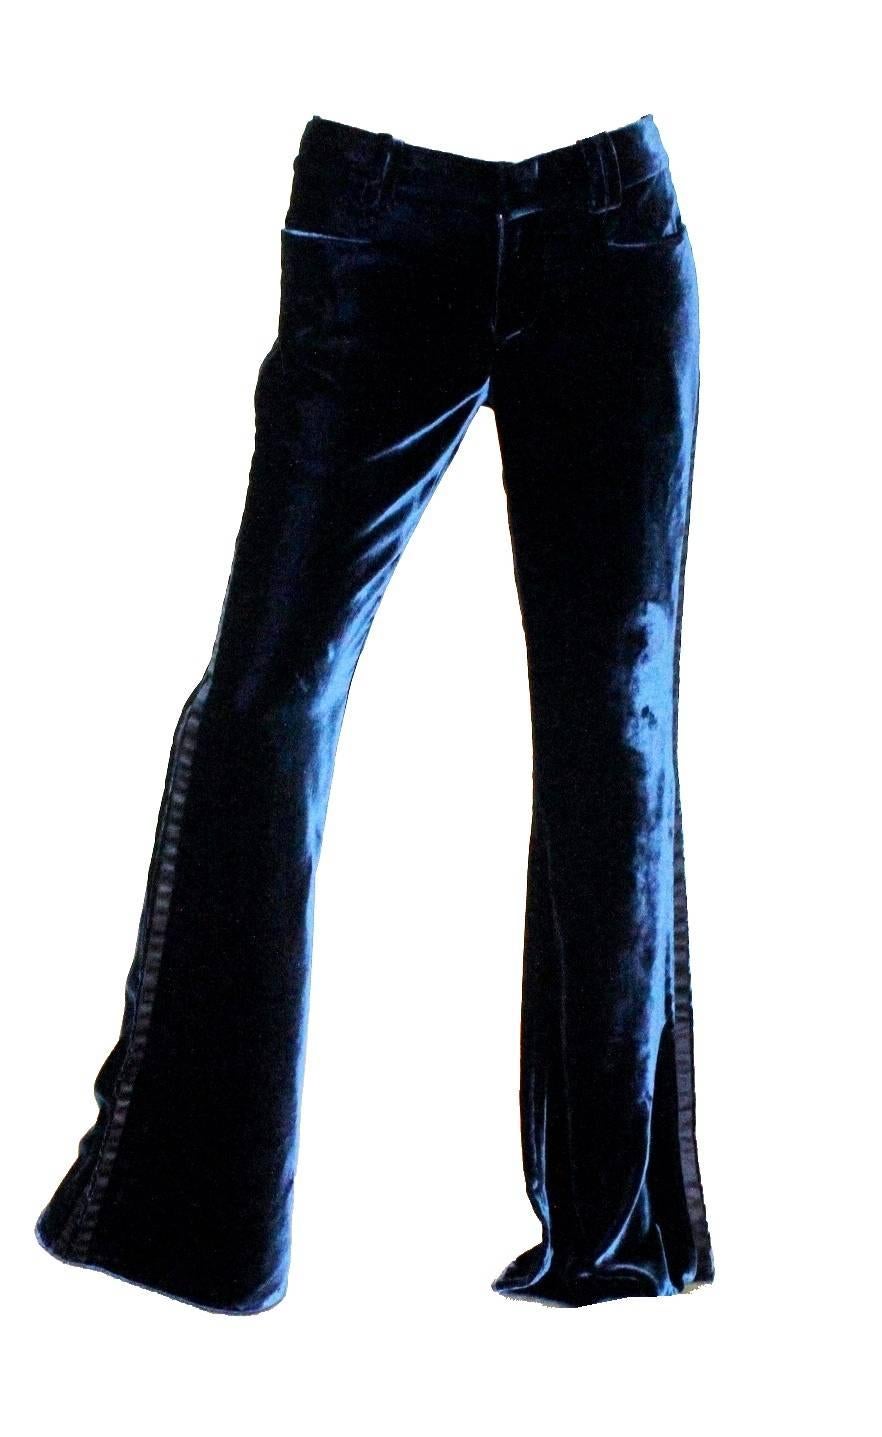 Stunning midnight blue Gucci velvet tuxedo pants
Created by Tom Ford for his final collection for Gucci in 2004
Finest plush velvet fabric
Silk stripes on sides
Unhemmed, original open hem
Made in Italy
Dry Clean Only

